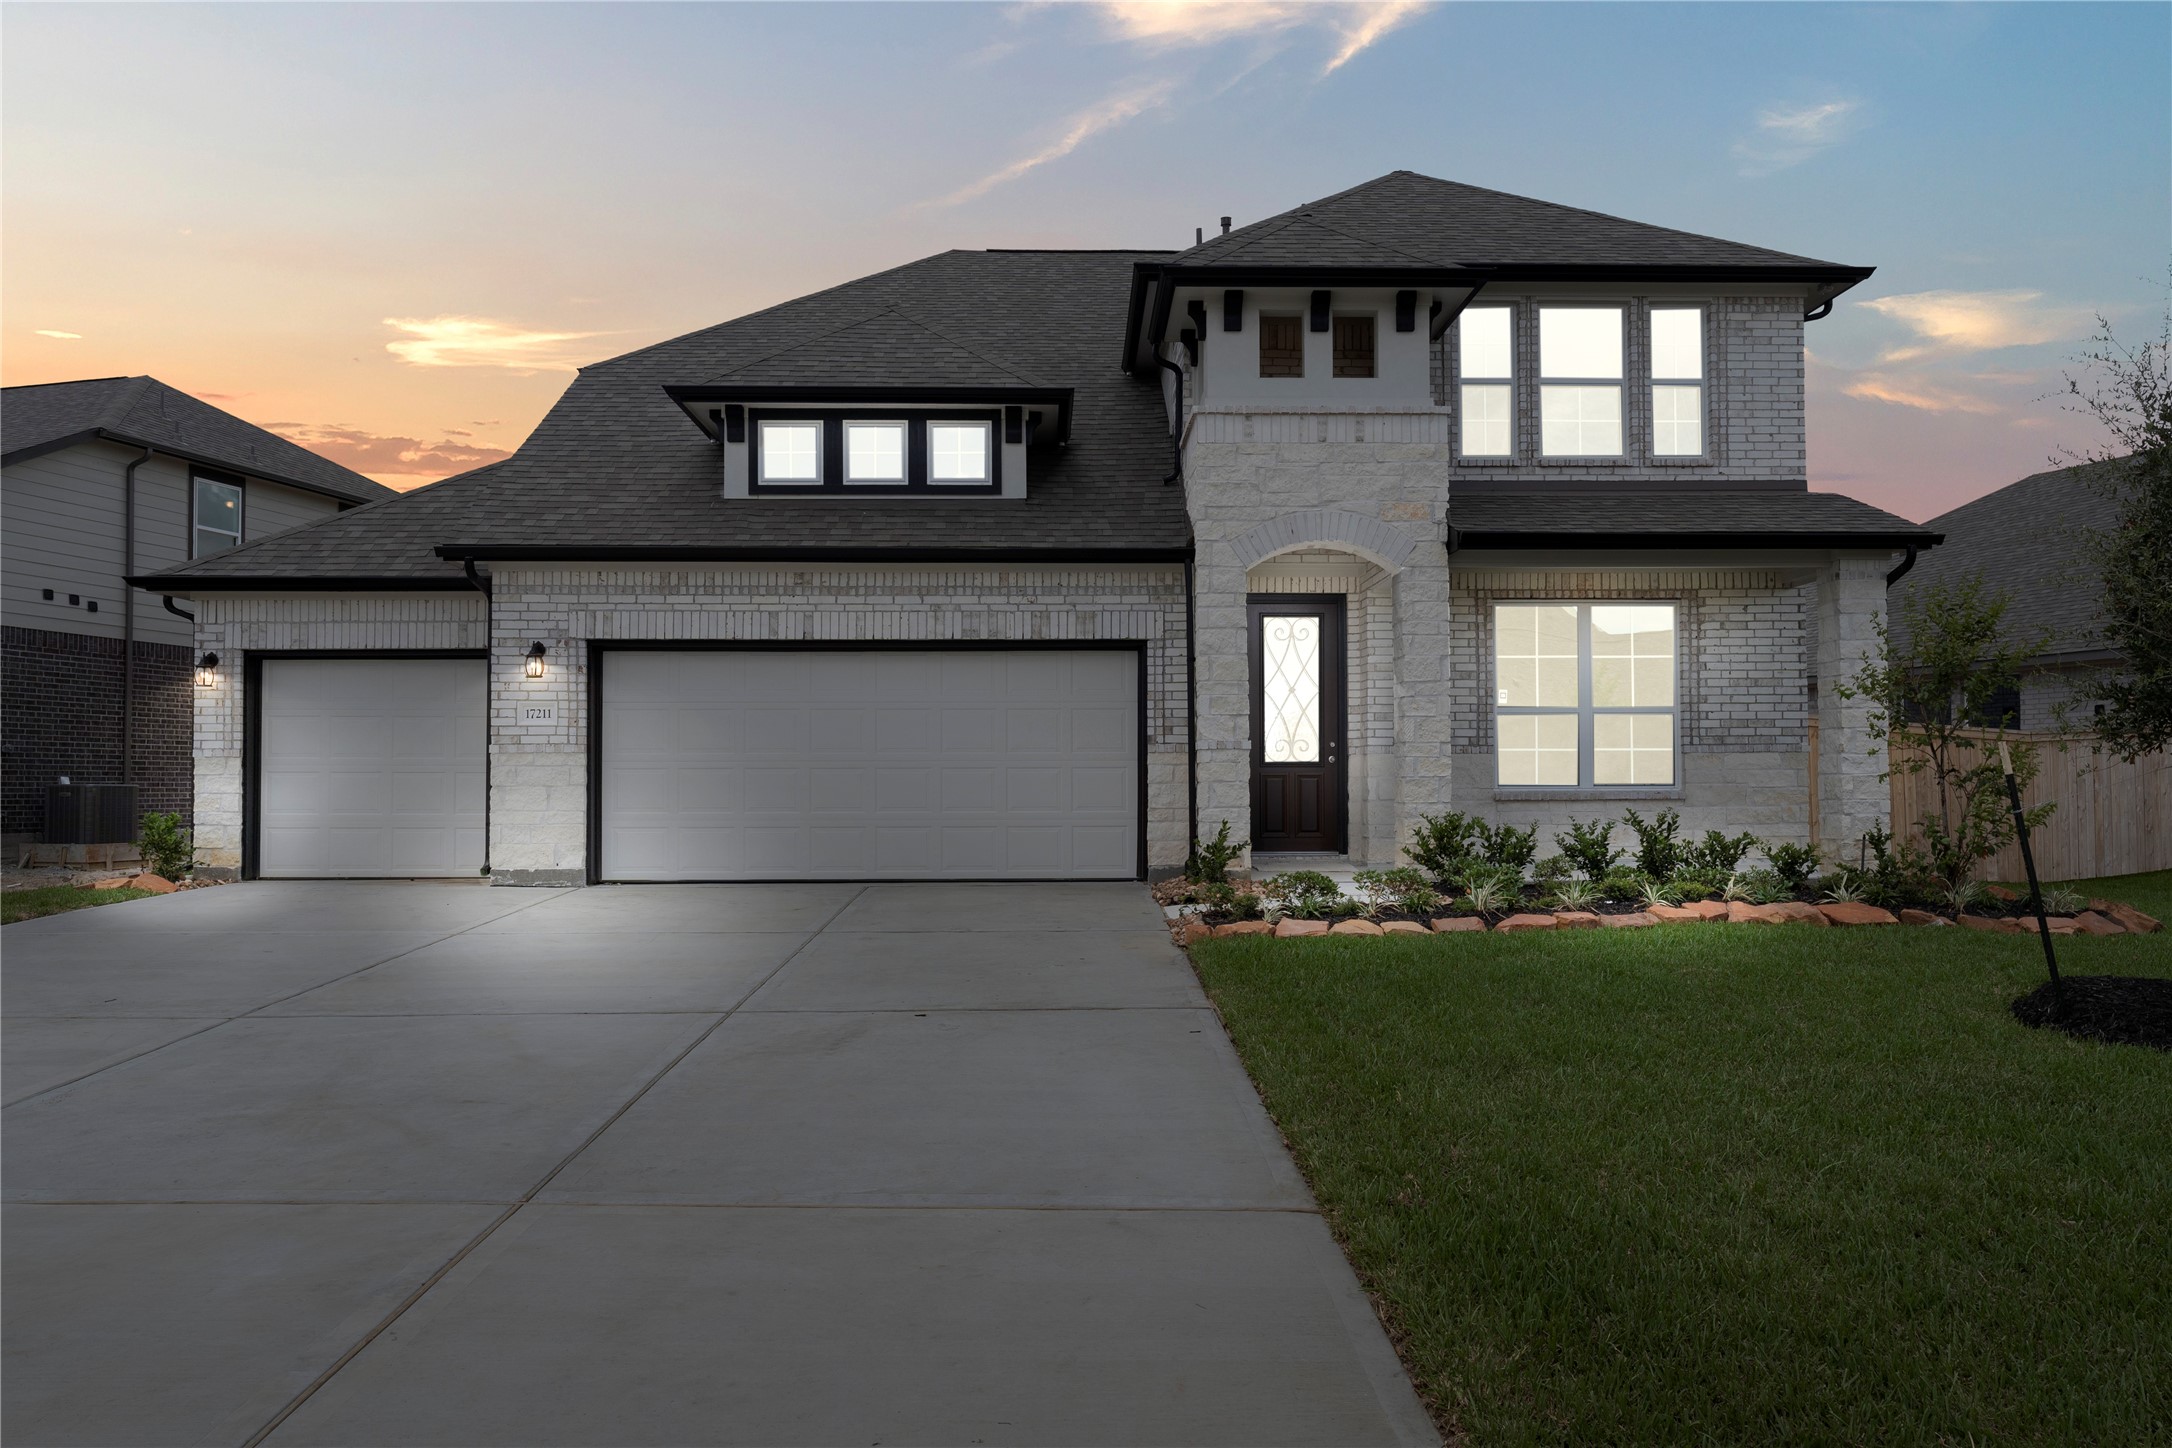 Welcome home to 17211 Daylily Dune Way located in the community of Dellrose and zoned to Waller ISD.